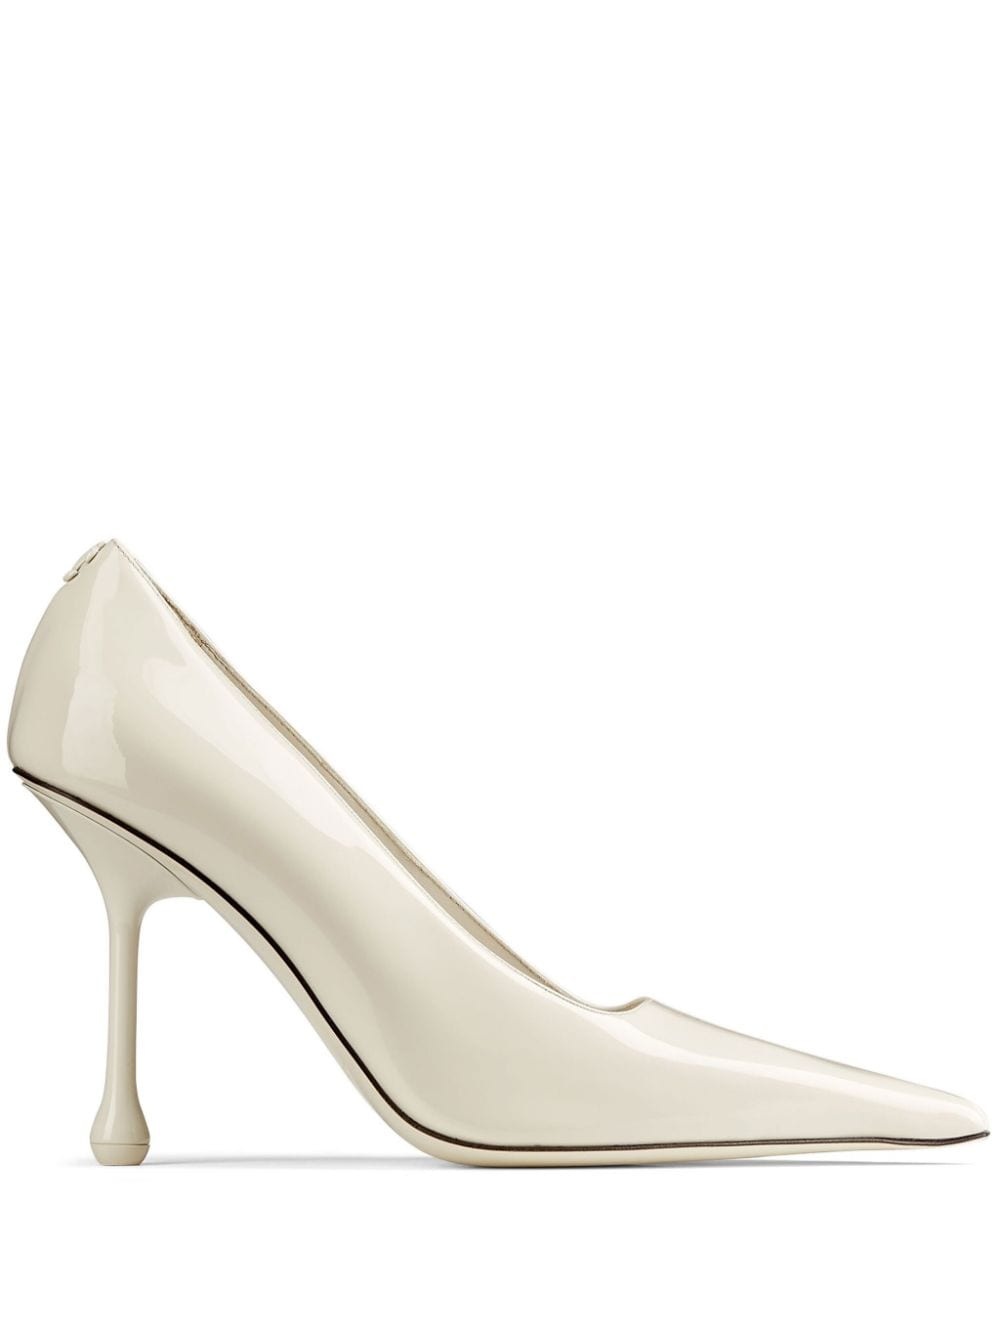 Ixia 95mm patent leather pumps - 1